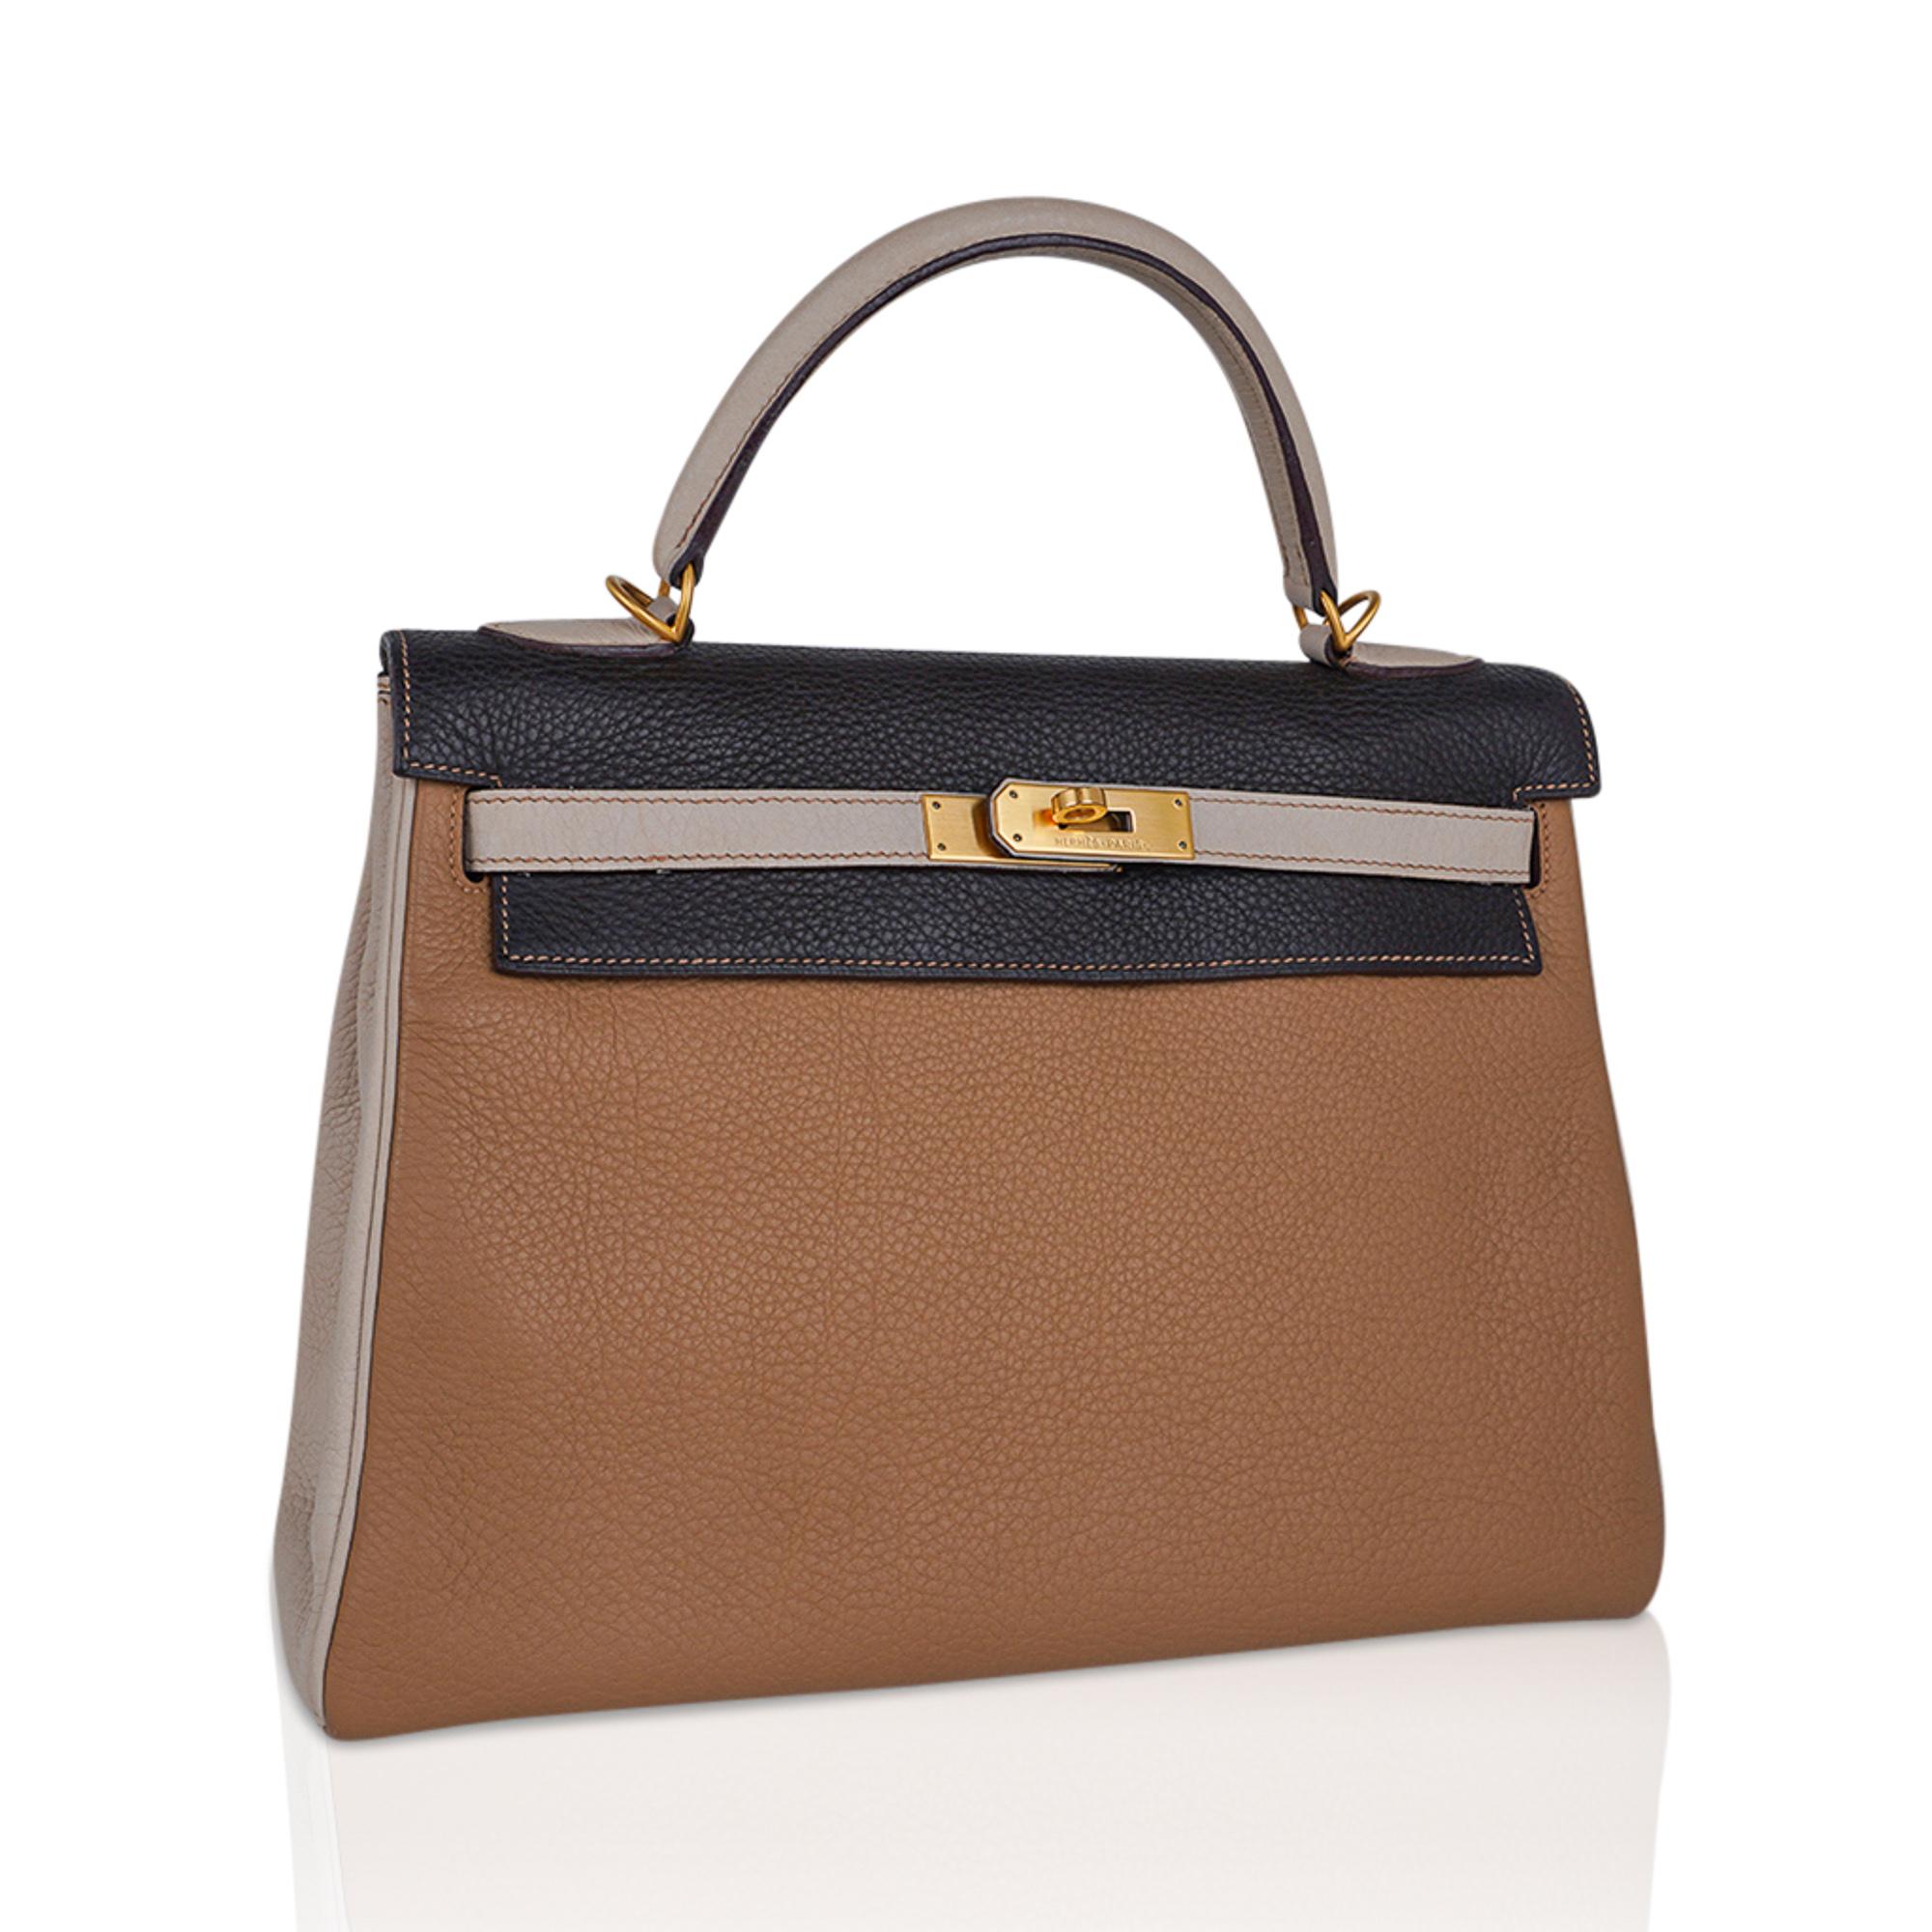 mightychic offers a Limited Edition  Hermes Kelly 32 Tri-color vintage bag featured in Tabac Camel, Ebene and Parchemin.
This gorgeous and rare special order tri color Kelly bag is rich in neutral earth tones.
Accentuated with brushed Gold